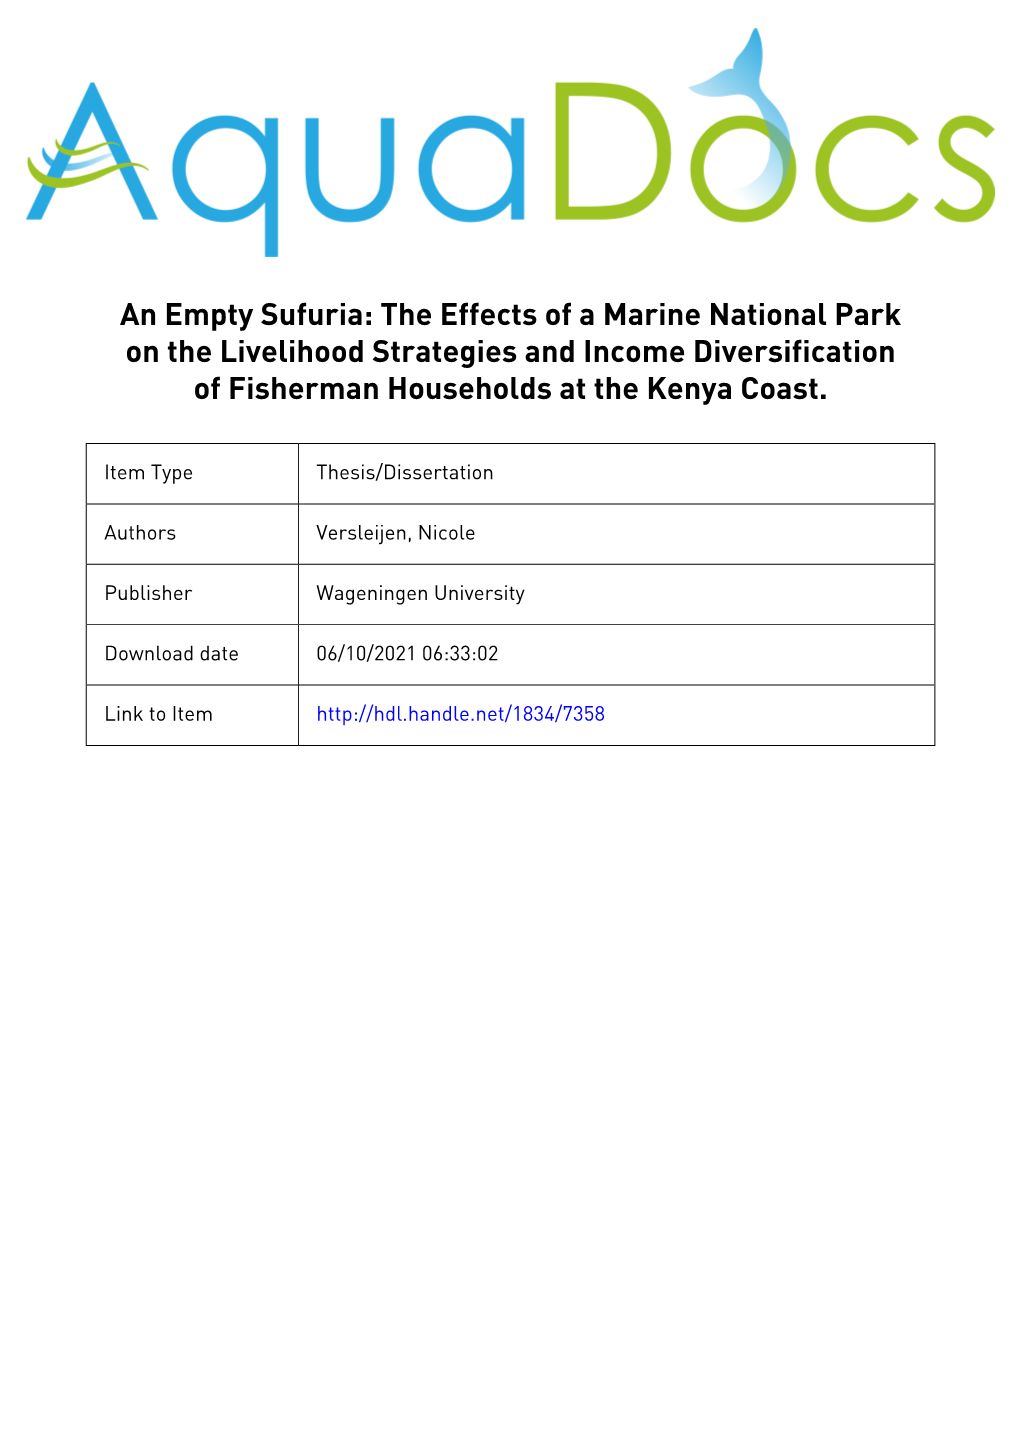 An Empty Sufuria: the Effects of a Marine National Park on the Livelihood Strategies and Income Diversification of Fisherman Households at the Kenya Coast